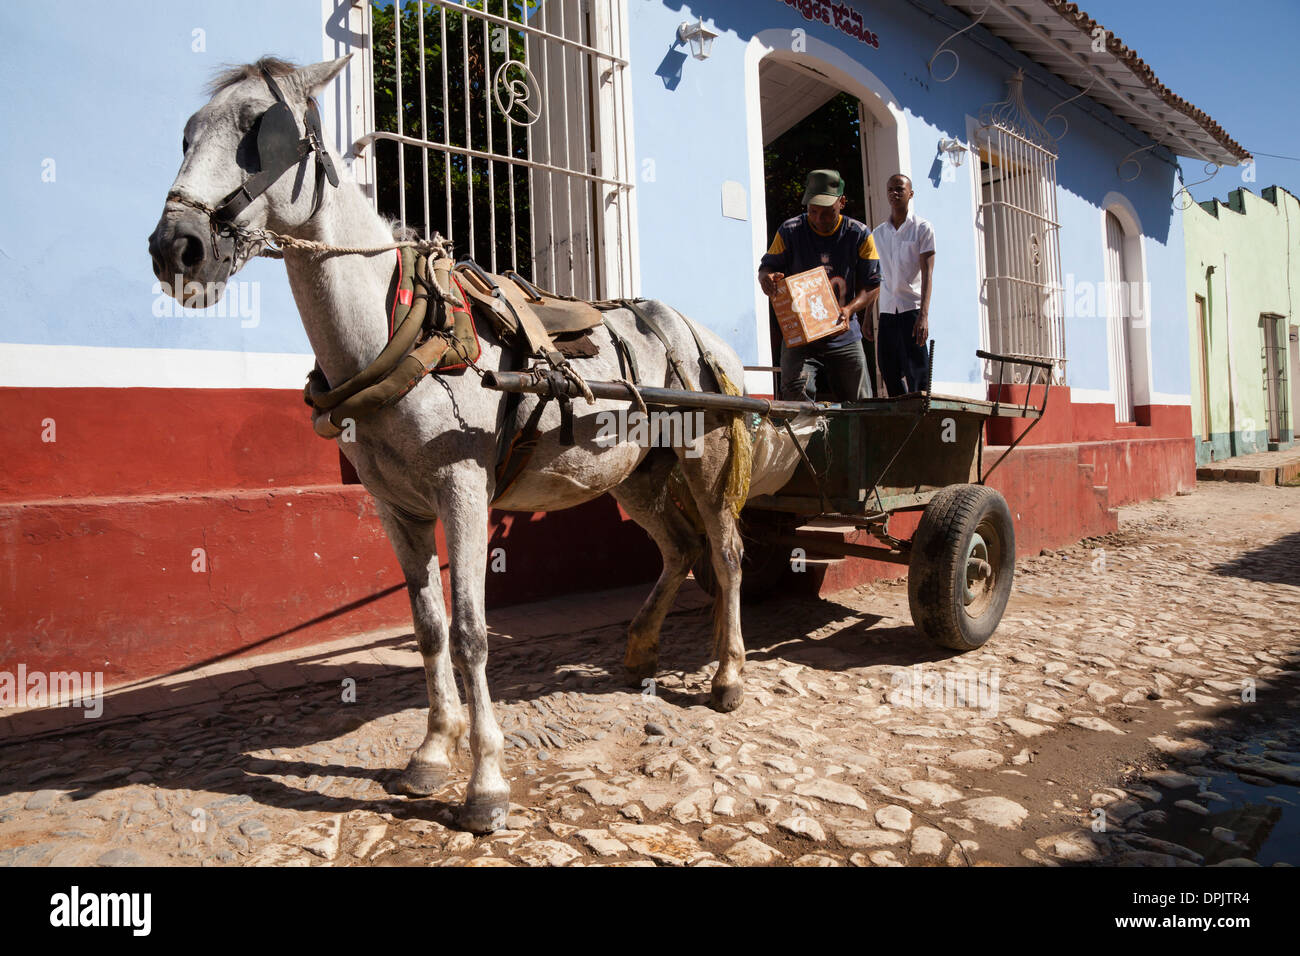 Loading cart in the streets of Trinidad, Cuba Stock Photo